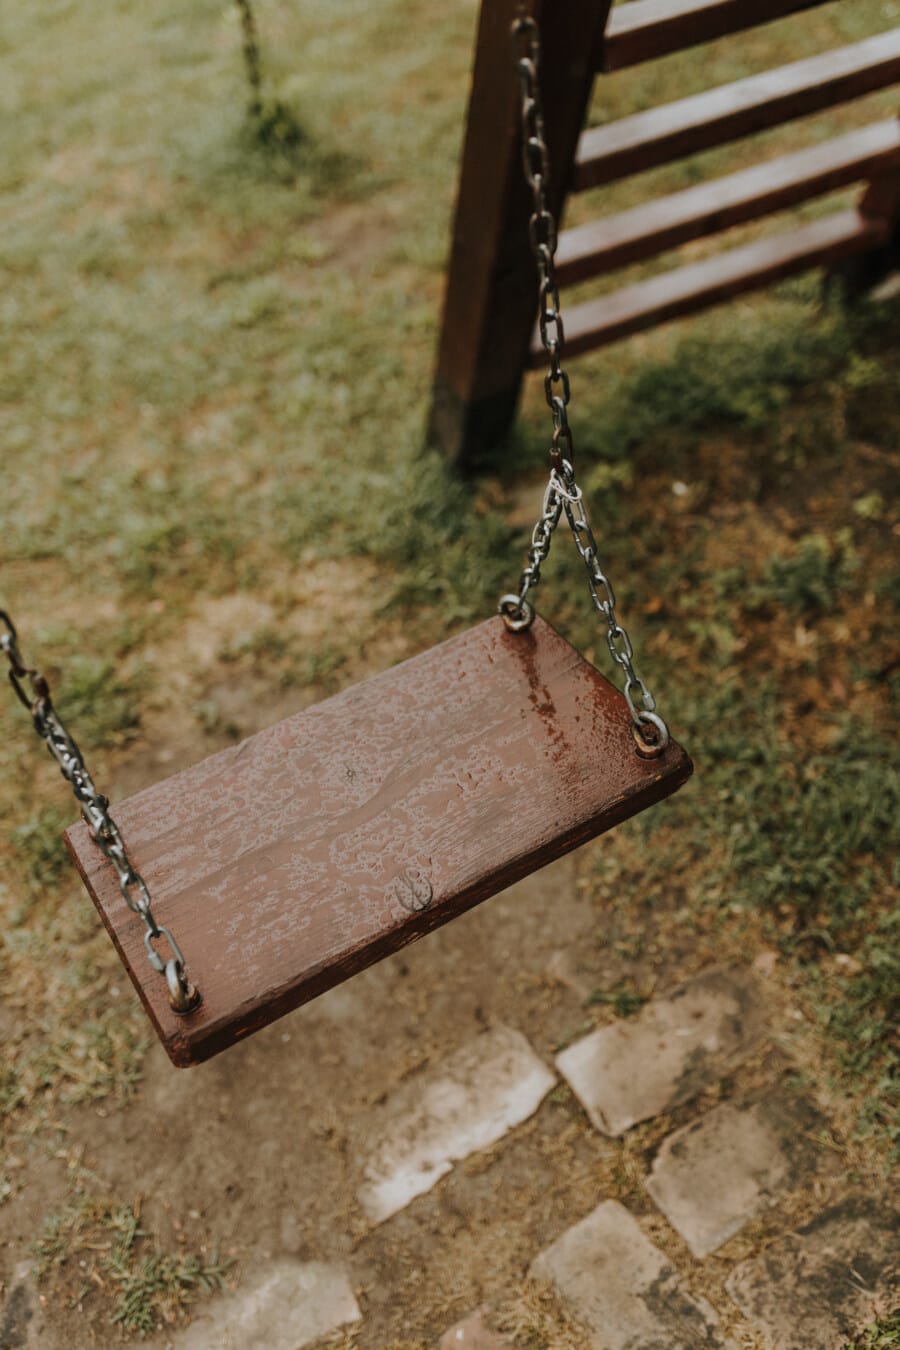 old, swing, chain, metal, wet, seat, outdoors, empty, hanging, retro